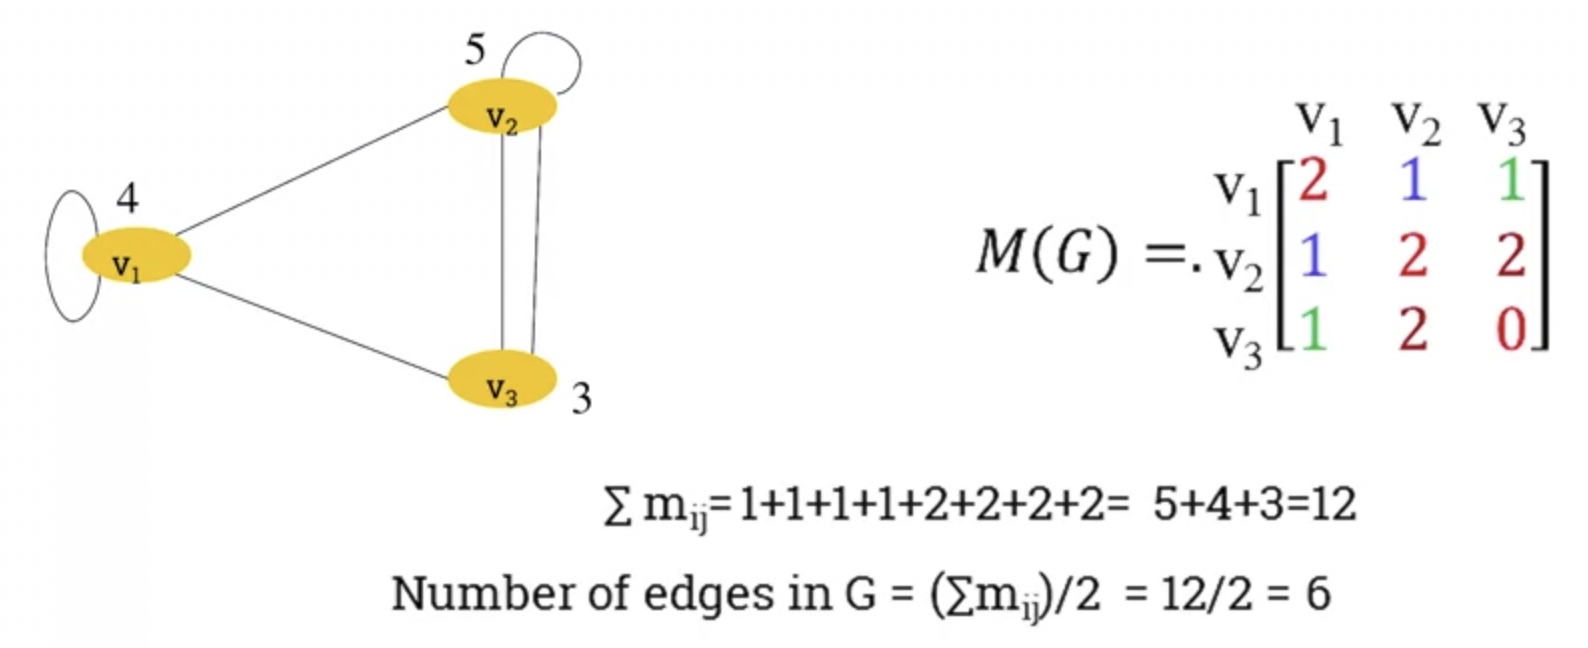 week-14-sum-of-degree-sequence